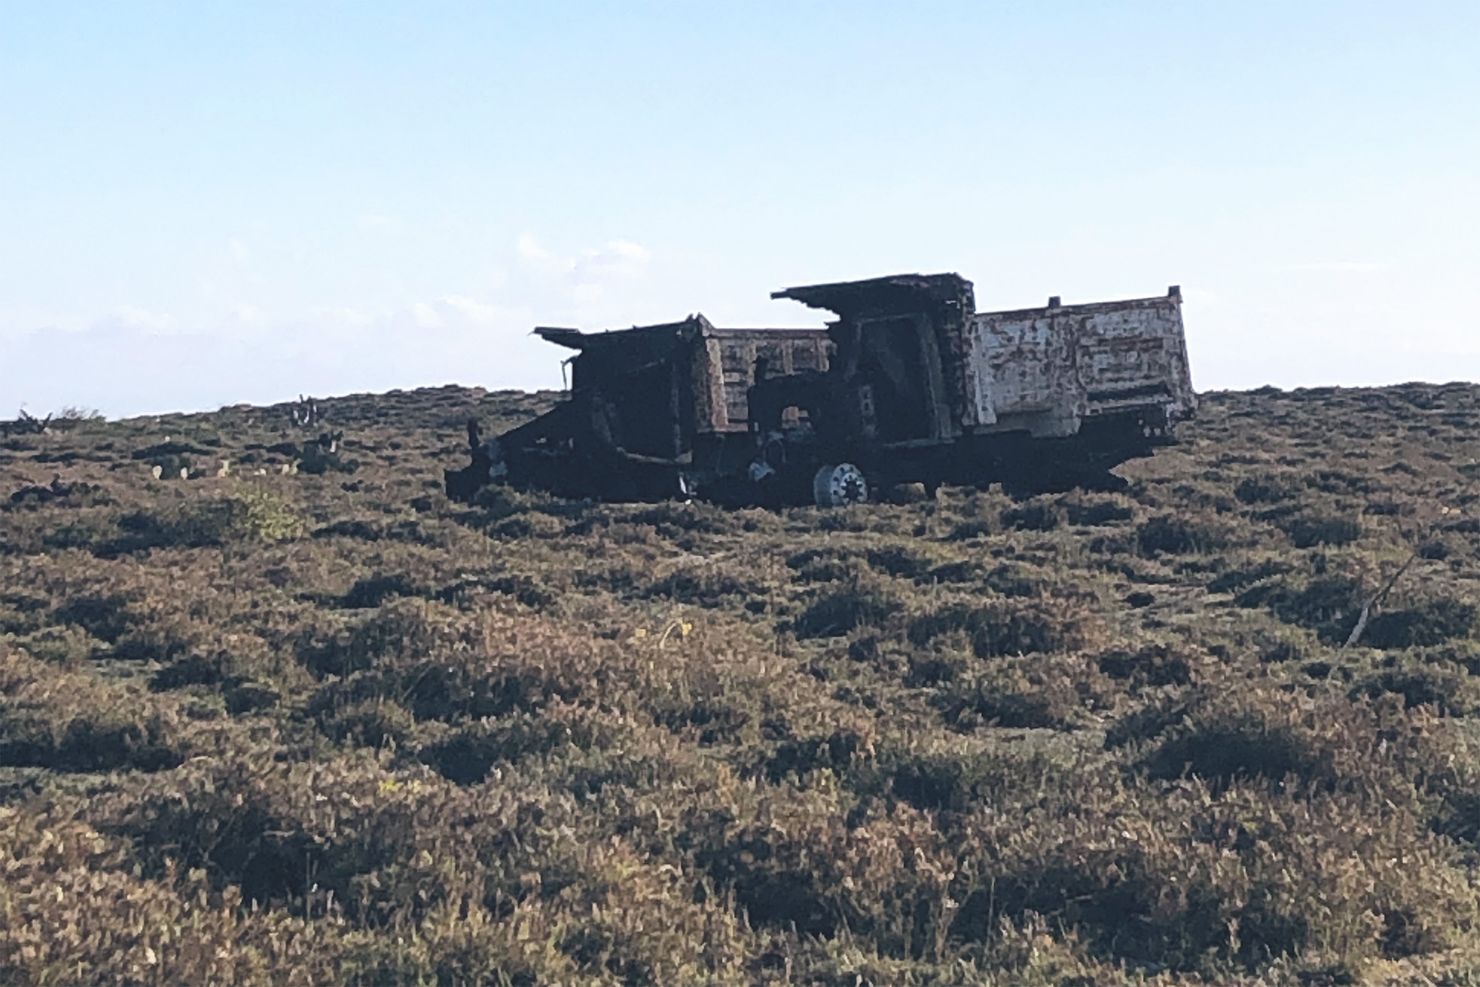 these burnt trucks on the side of san mateo del mar’s entrance road are a sign of the Ikoot community’s protest against proposed wind farm projects on their sacred land